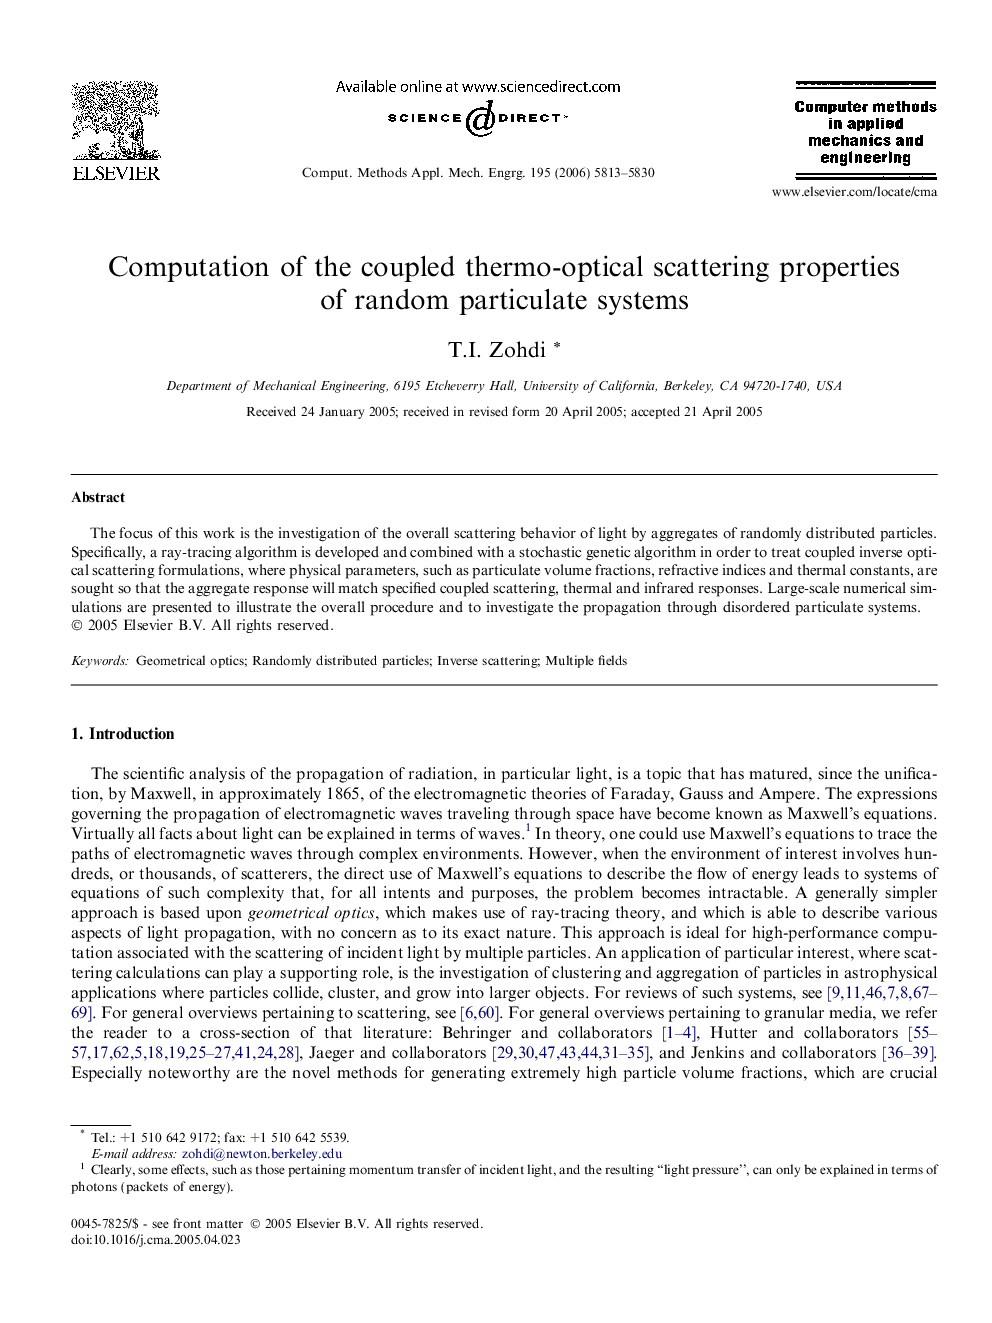 Computation of the coupled thermo-optical scattering properties of random particulate systems